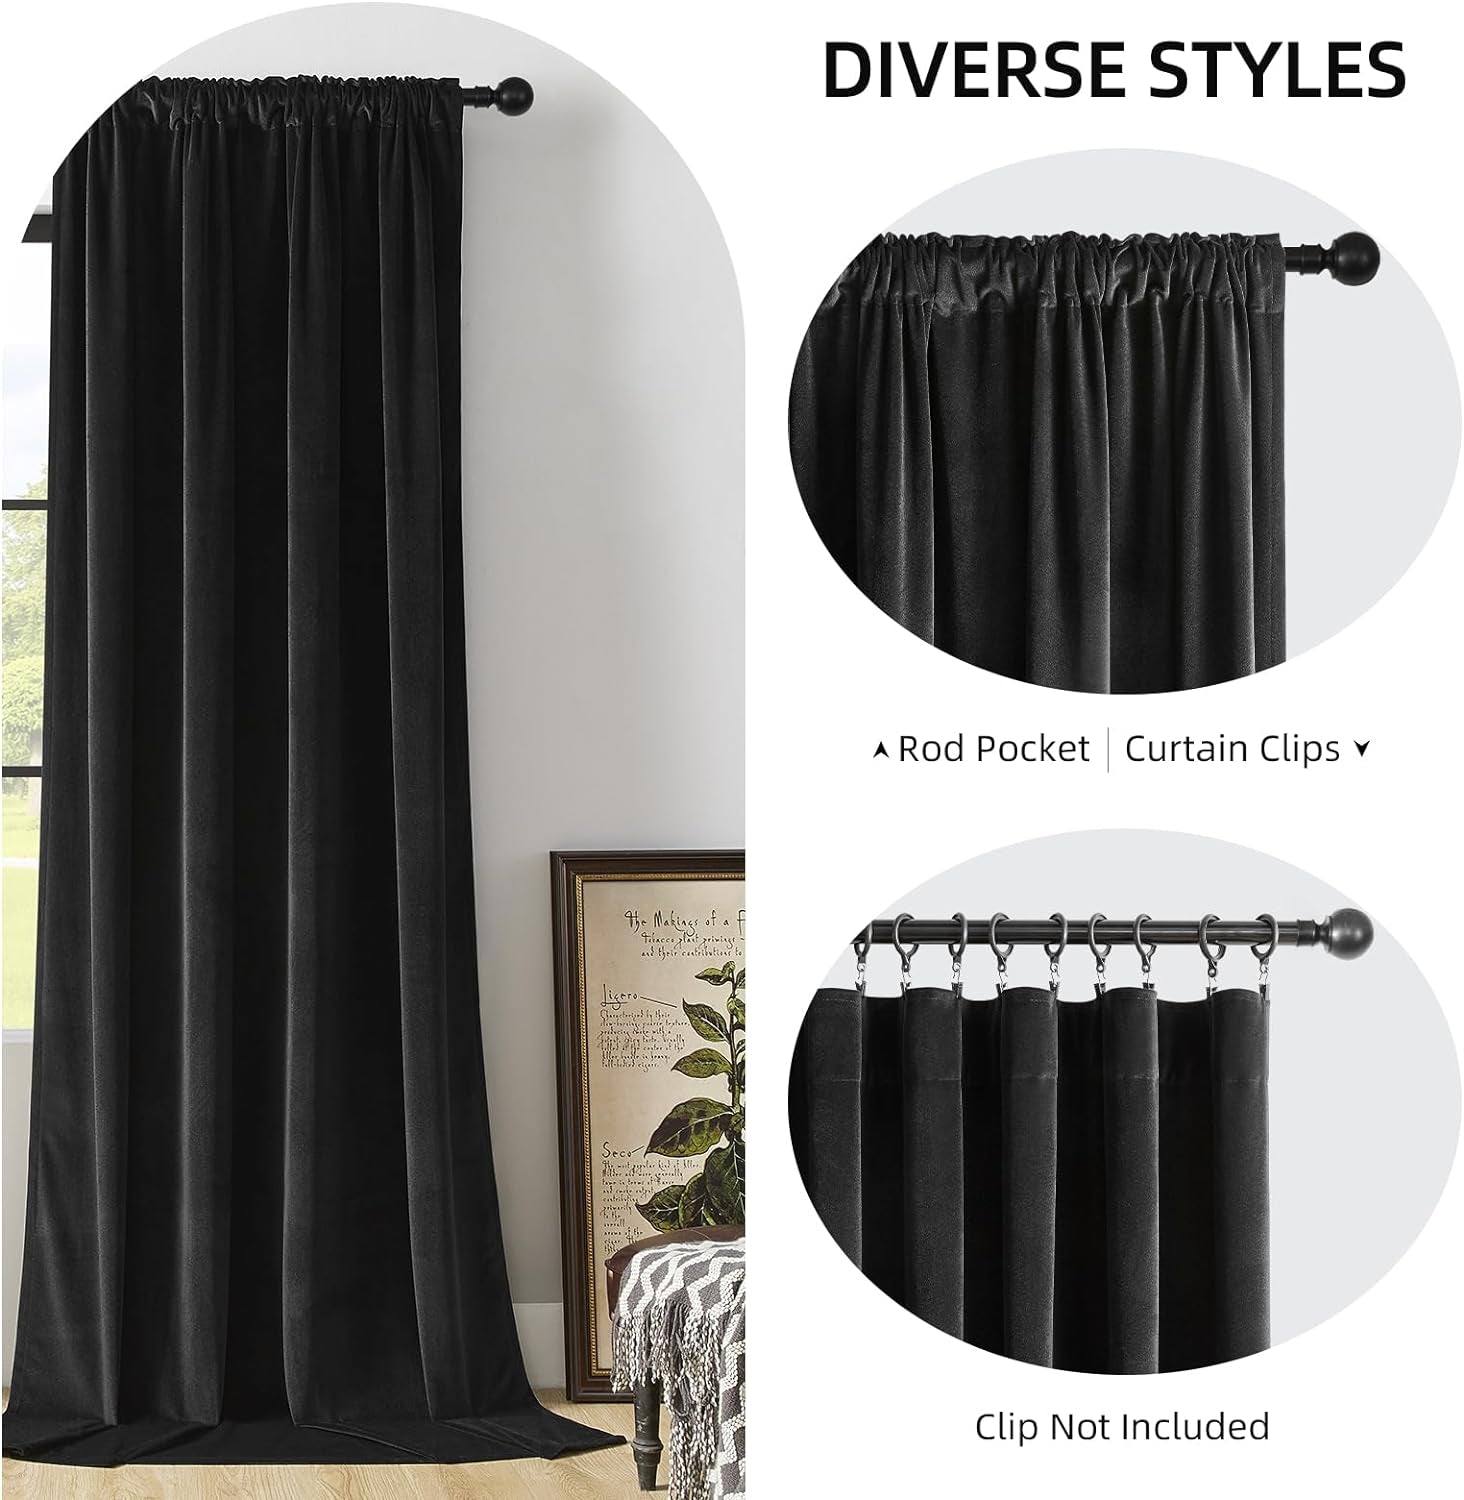 Joydeco Black Velvet Curtains 90 Inch Length 2 Panels, Luxury Blackout Rod Pocket Thermal Insulated Window Curtains, Super Soft Room Darkening Drapes for Living Dining Room Bedroom,W52 X L90 Inches  Joydeco   